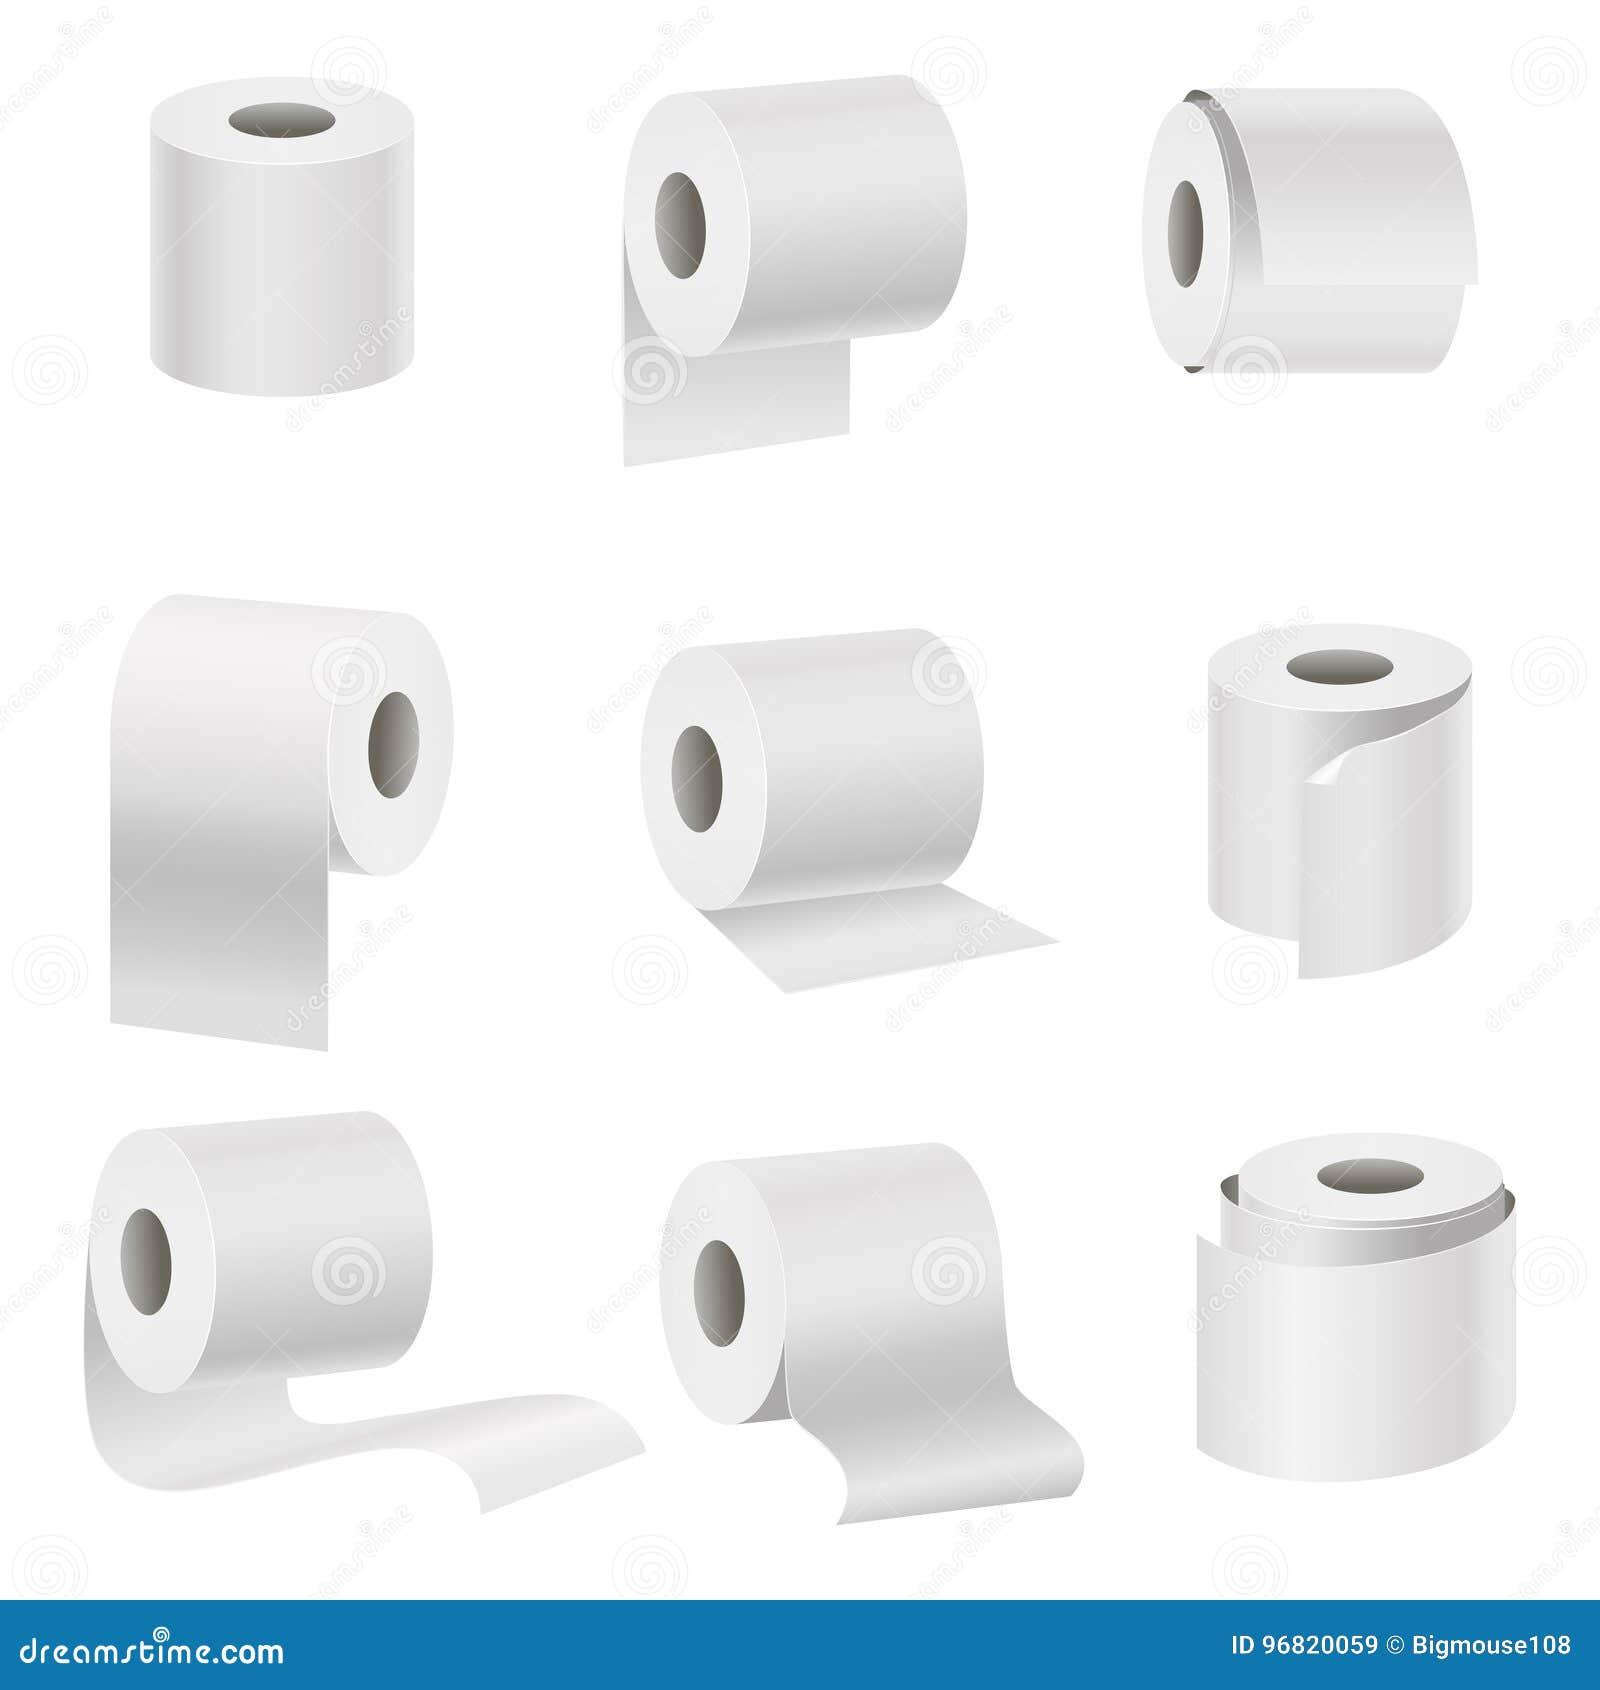 Realistic Template Blank White Toilet Paper Set. Vector